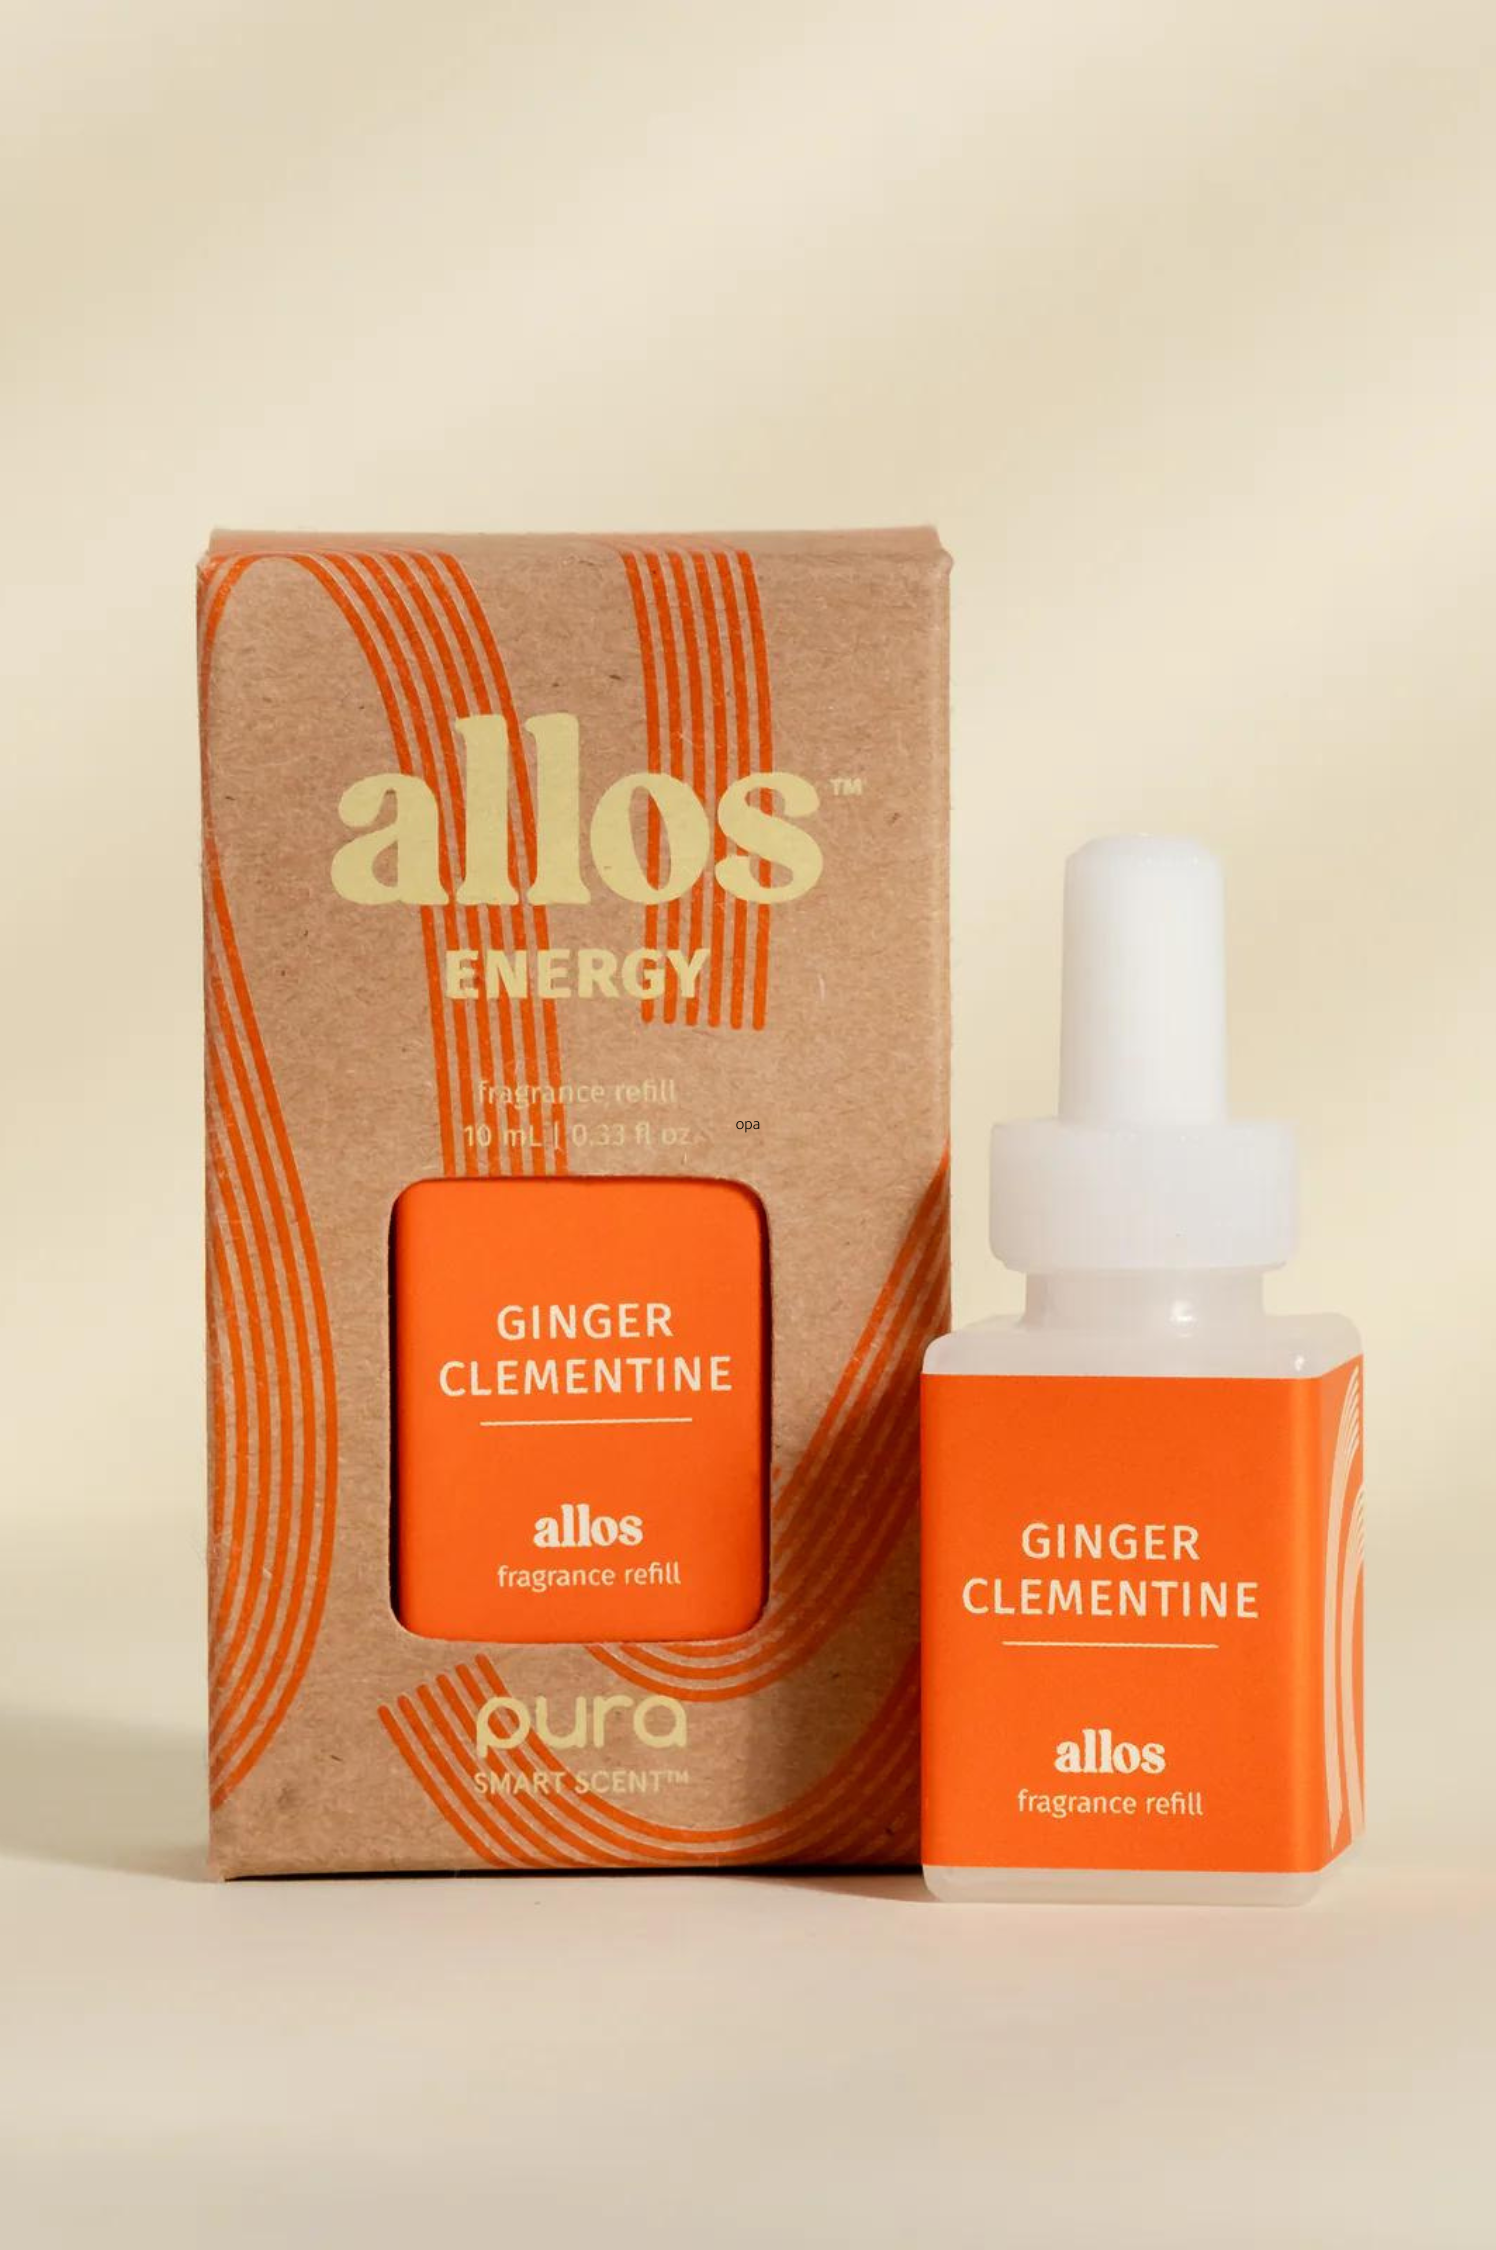 Allos- Ginger Clementine